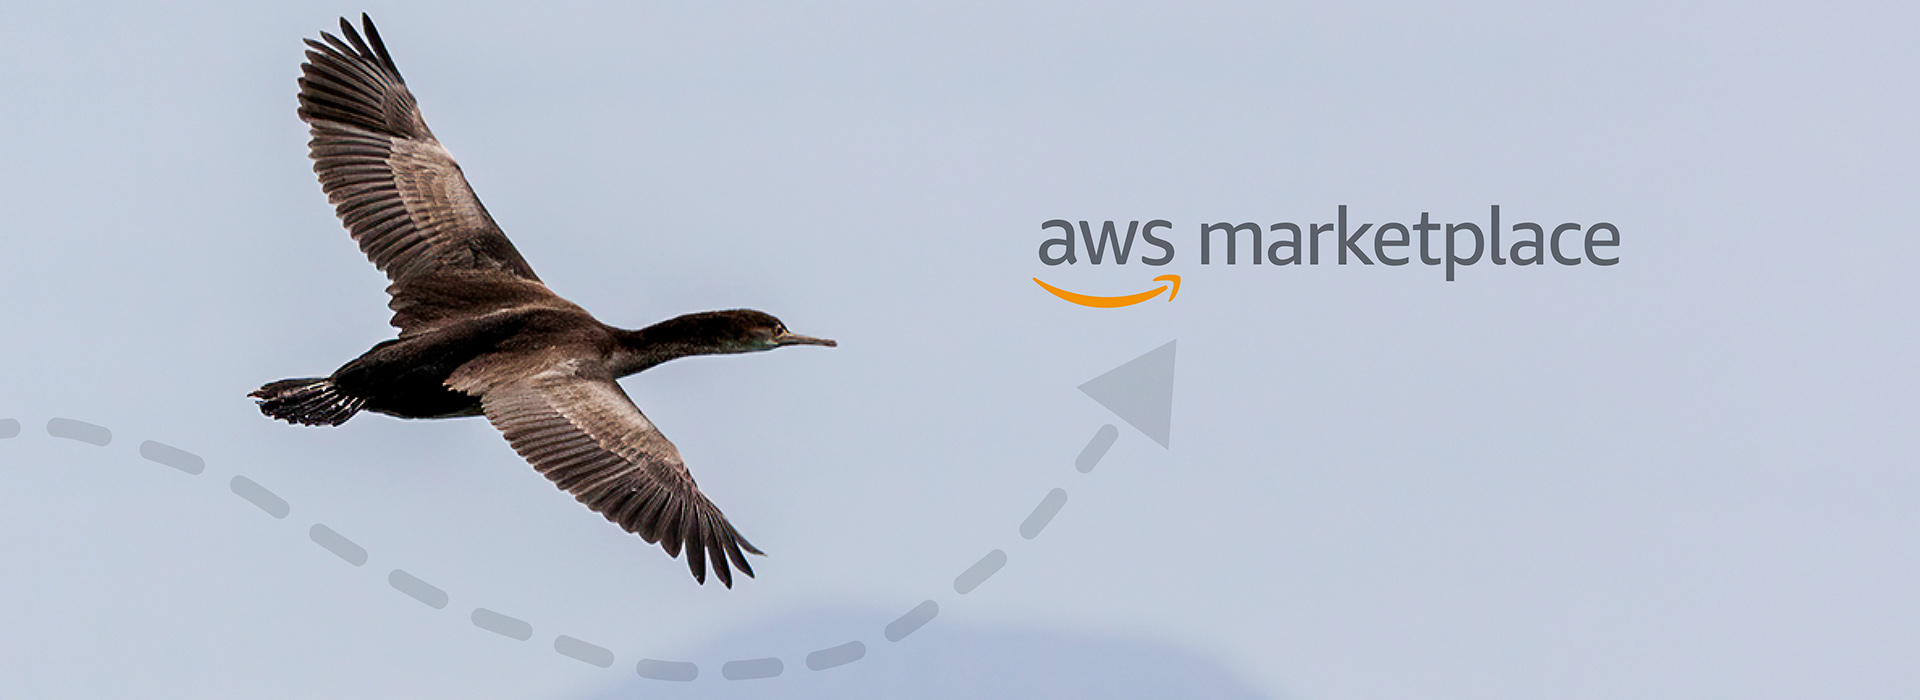 How to Migrate an On-Premises Solution to AWS Marketplace